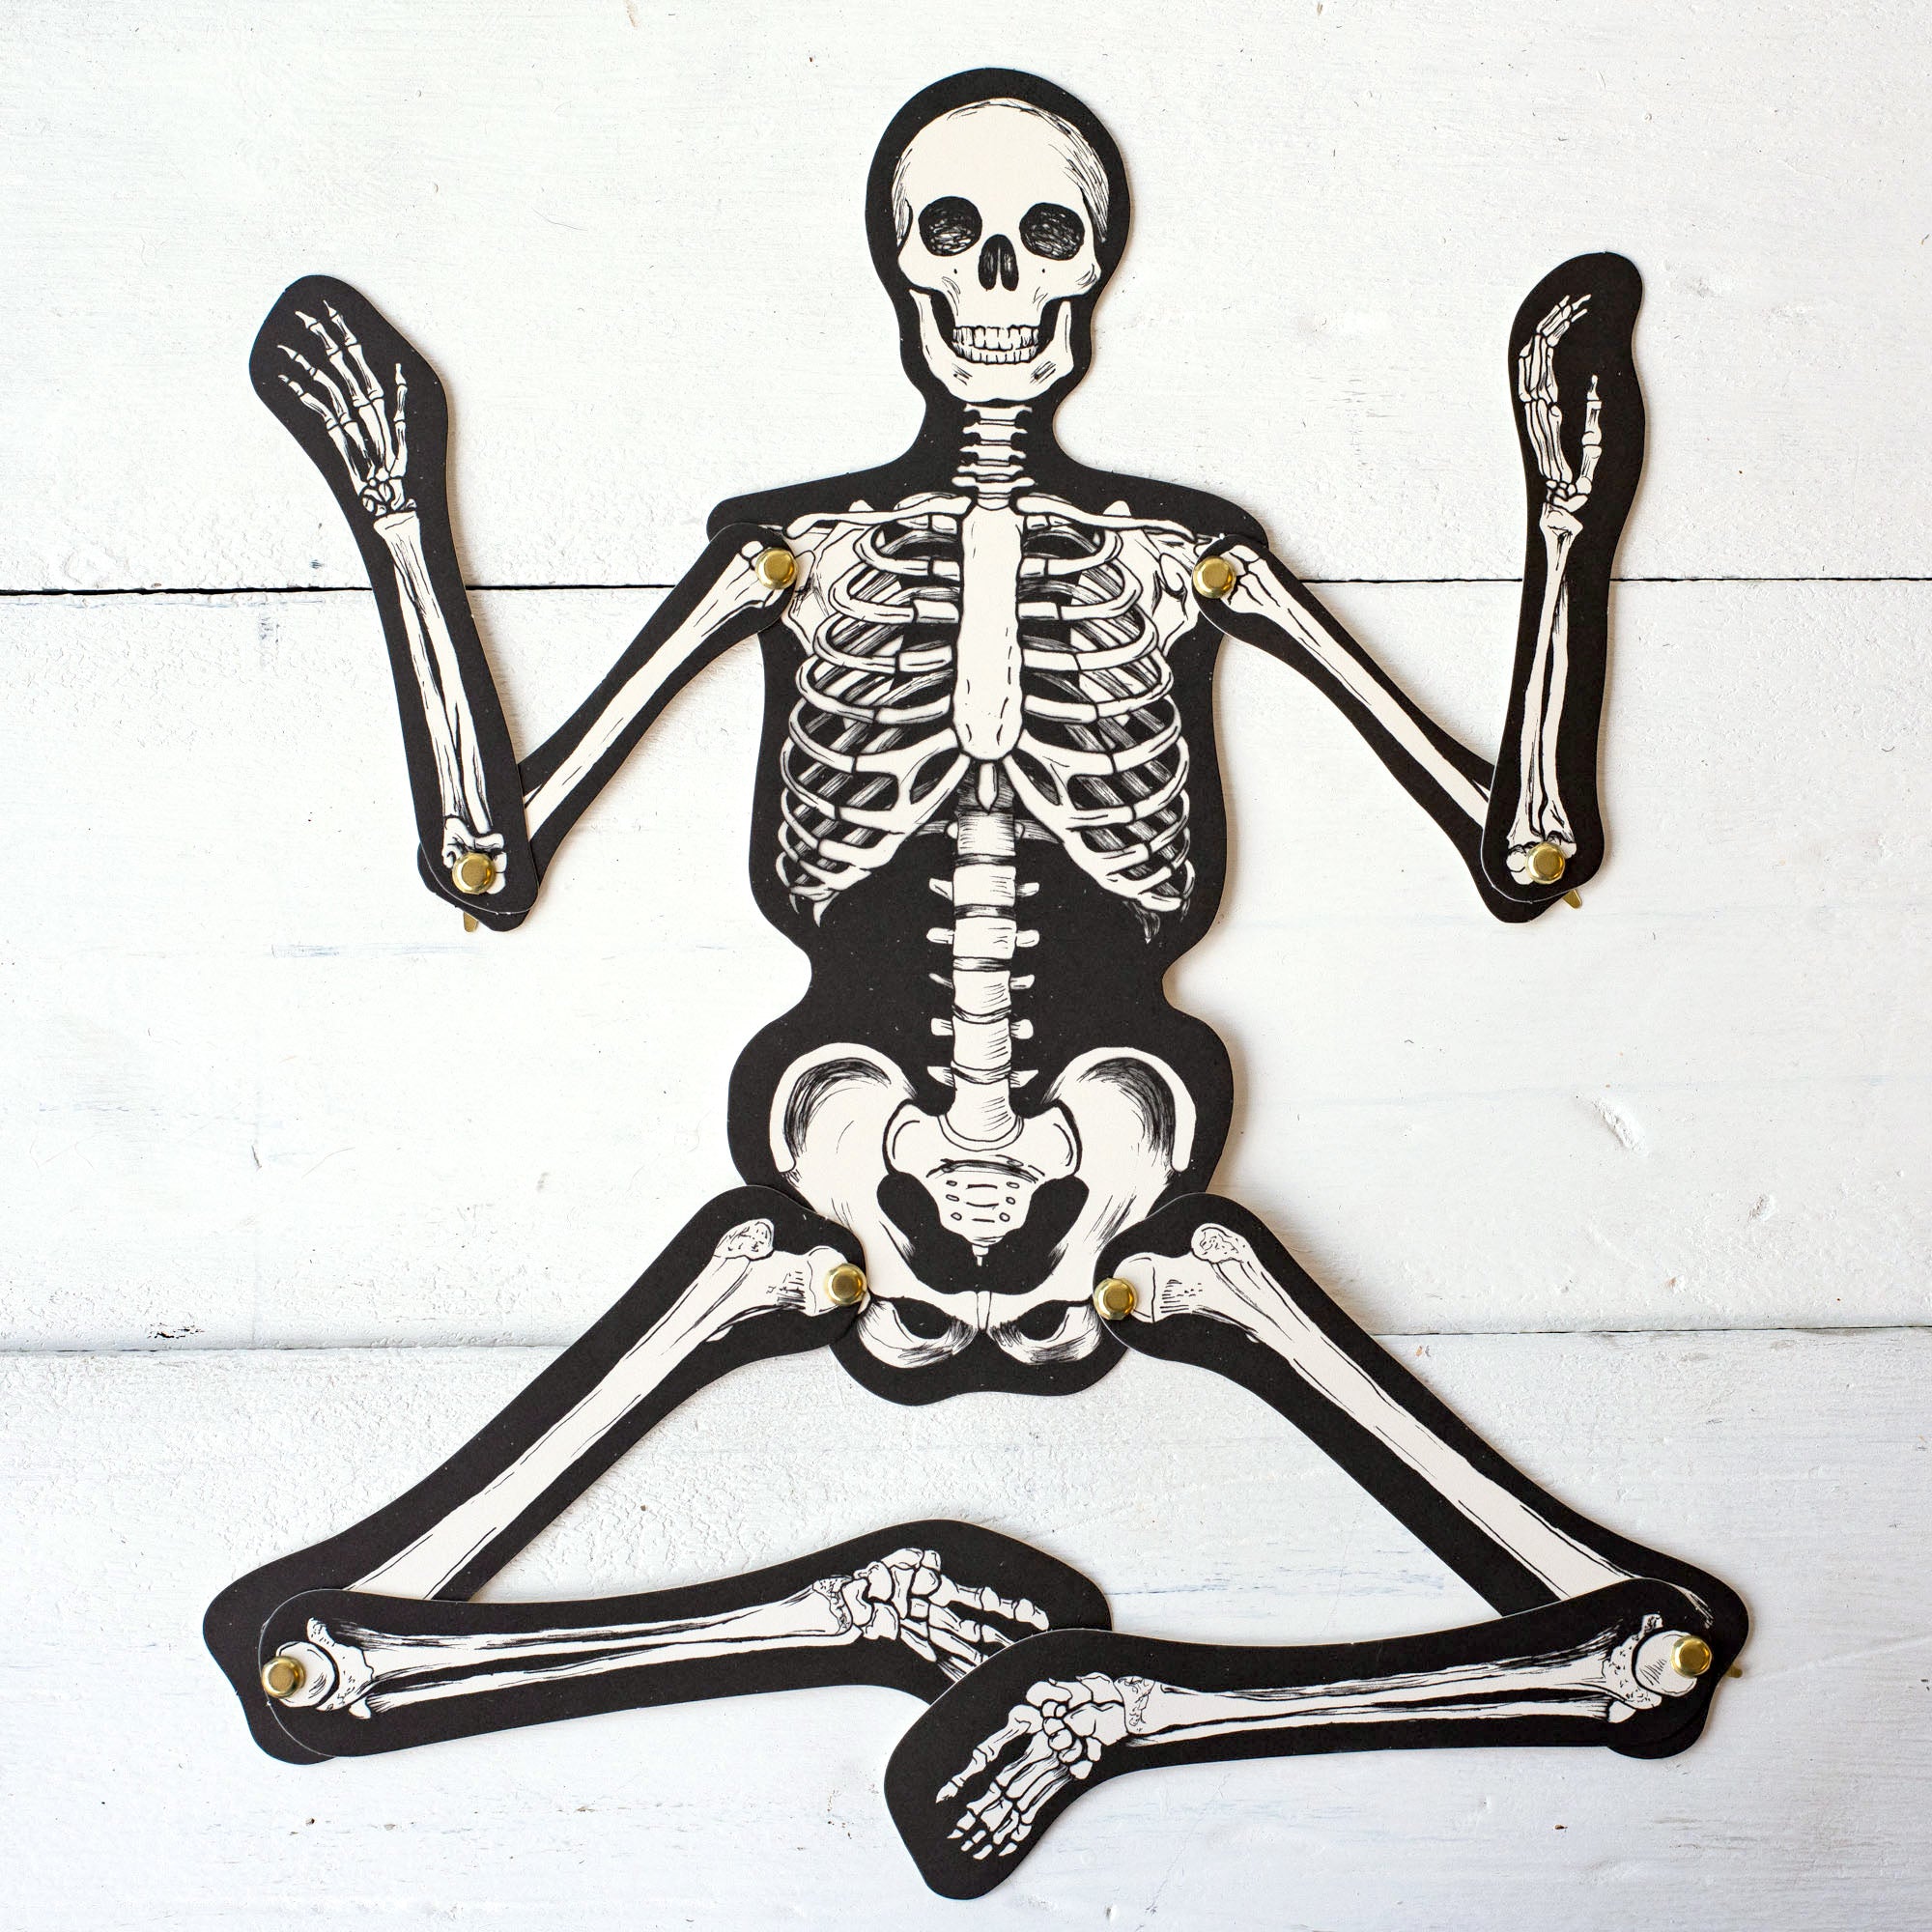 An Articulated Skeleton Decorative Accent in a pose with its arms and legs bent at the joints.